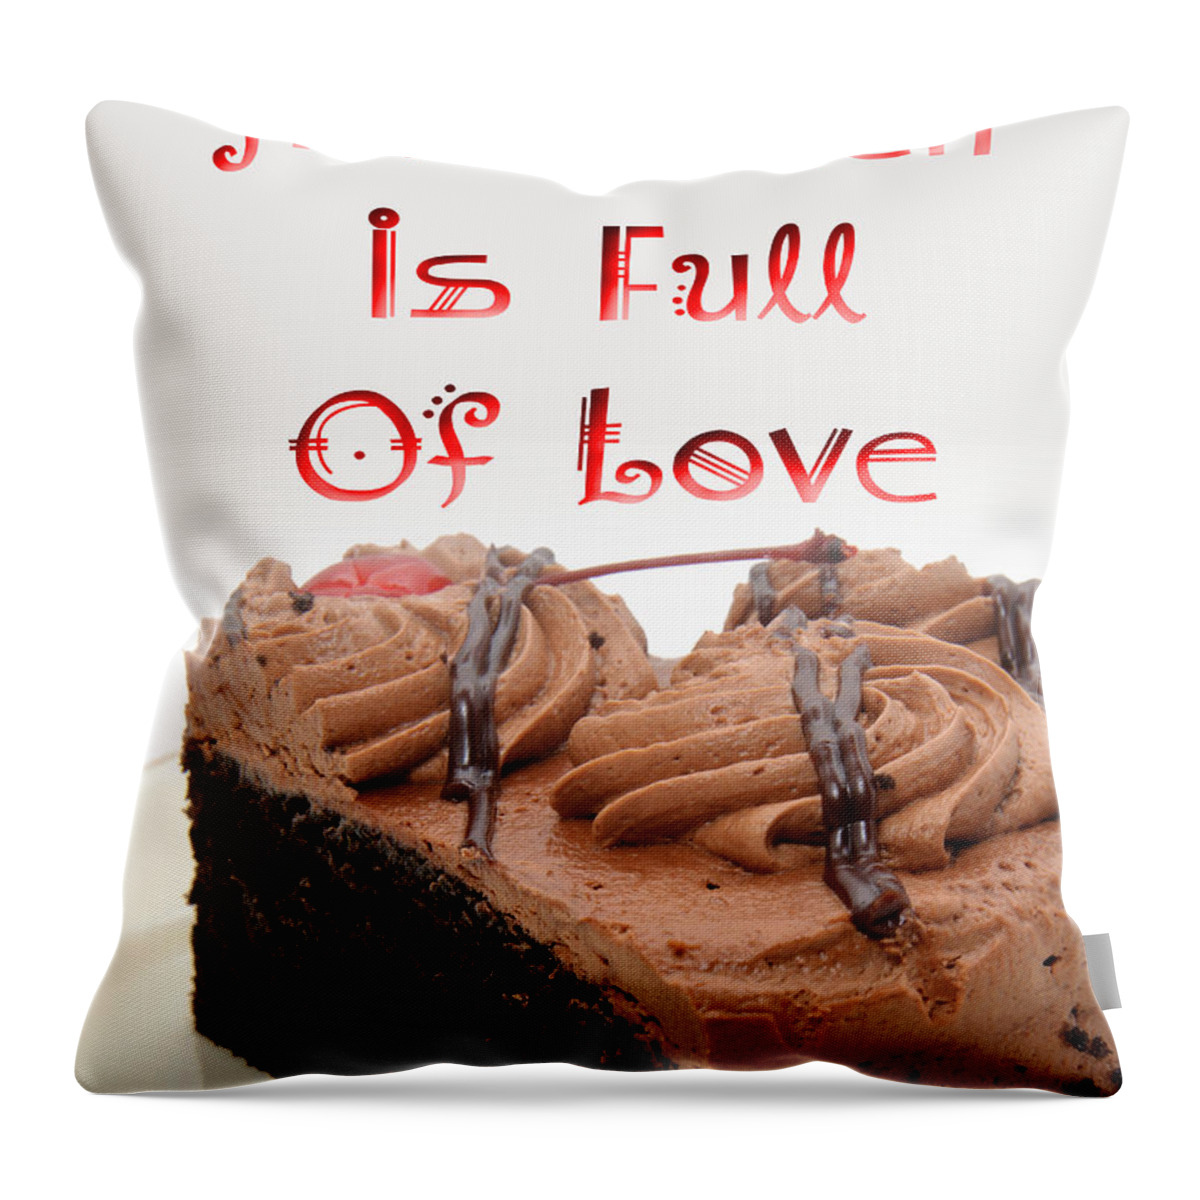 Dessert Throw Pillow featuring the digital art A Kitchen Is Full Of Love 4 by Andee Design